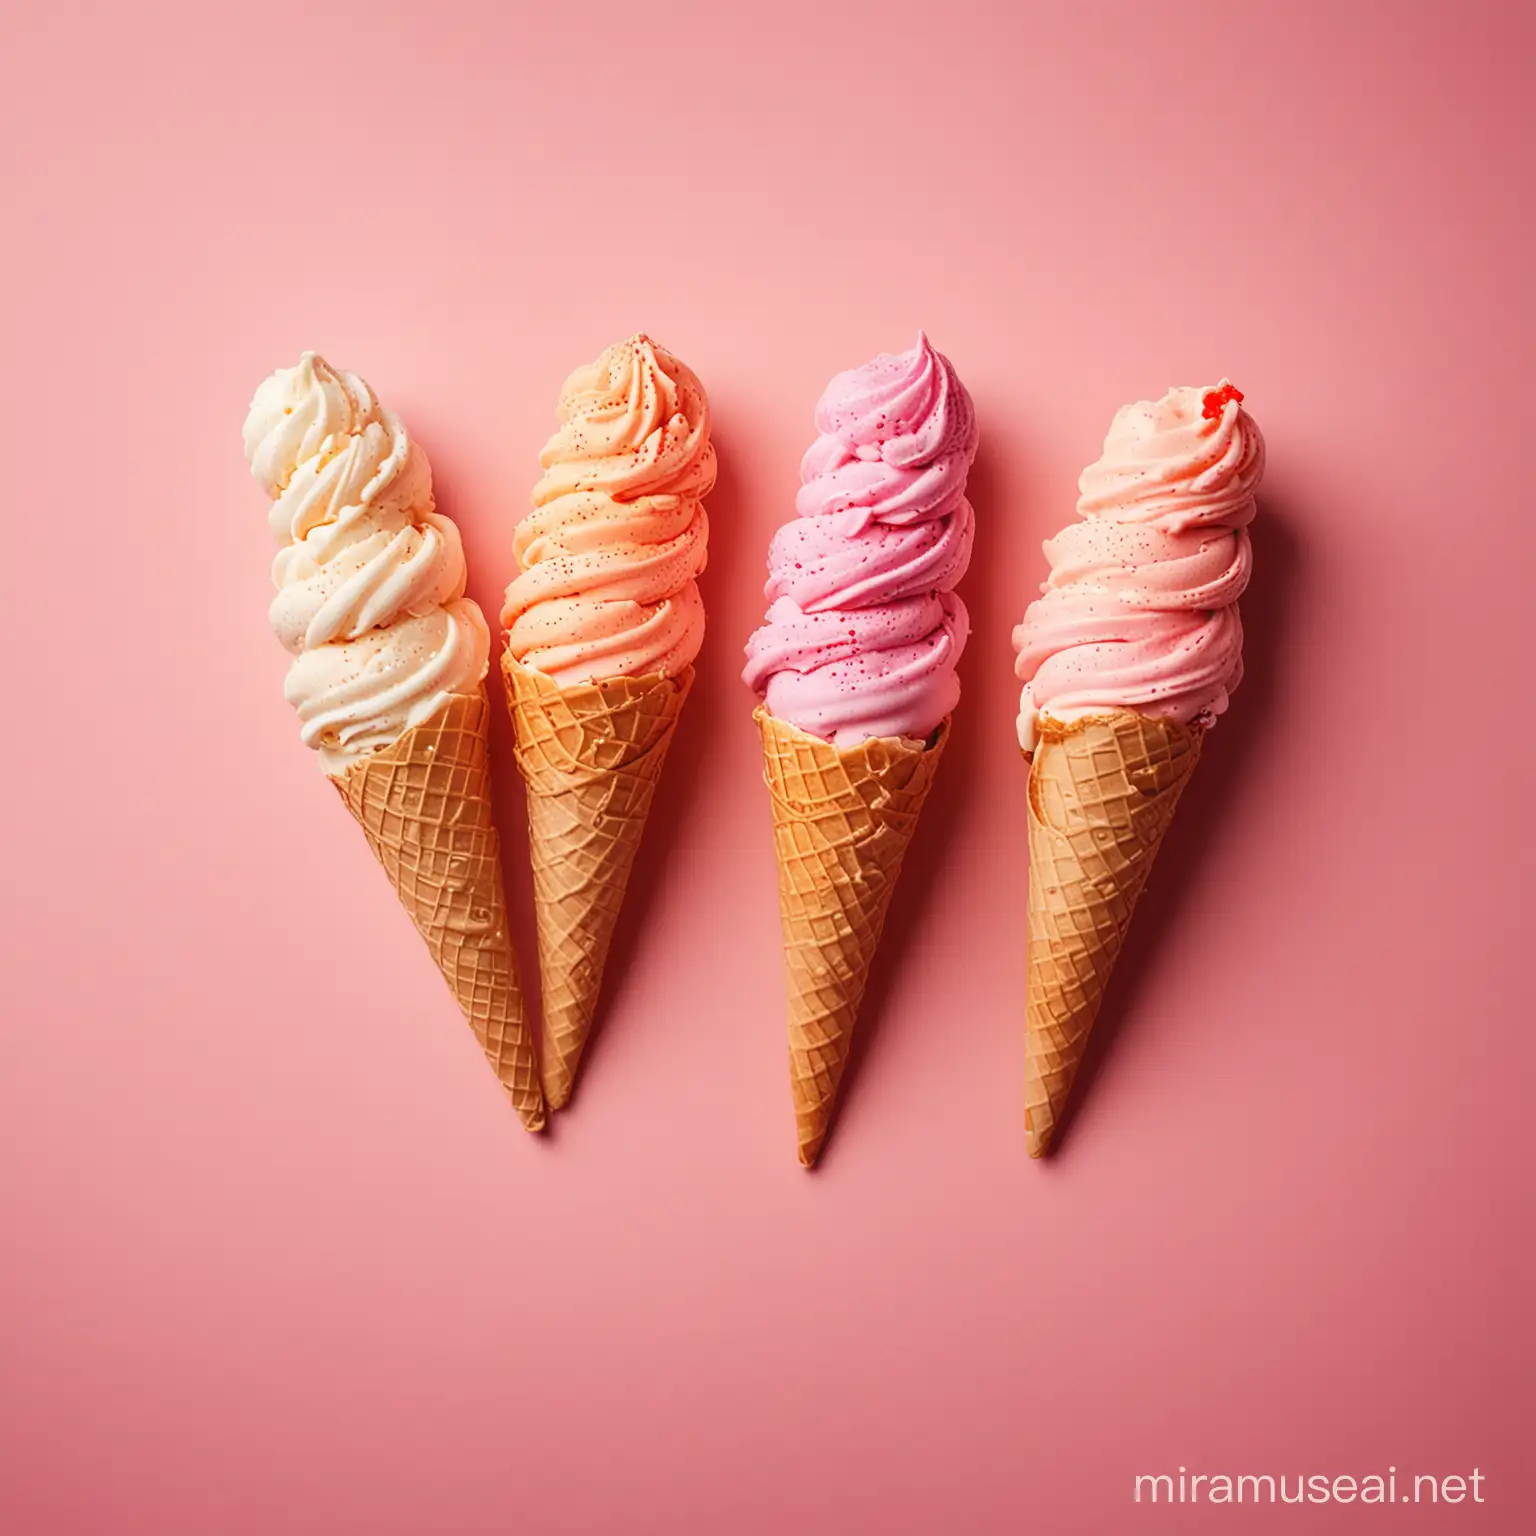 A studio shot of twisted ice creams. The number of ice creams is 4. The first ice cream is pink, the second is cappuccino, the third is tangerine and the fourth is iced raspberry. I want a theme around the ice creams, such as some splashes or glows. Each ice cream has only one colour. Each ice cream has the same cone. Light red background. Ultra-realistic.